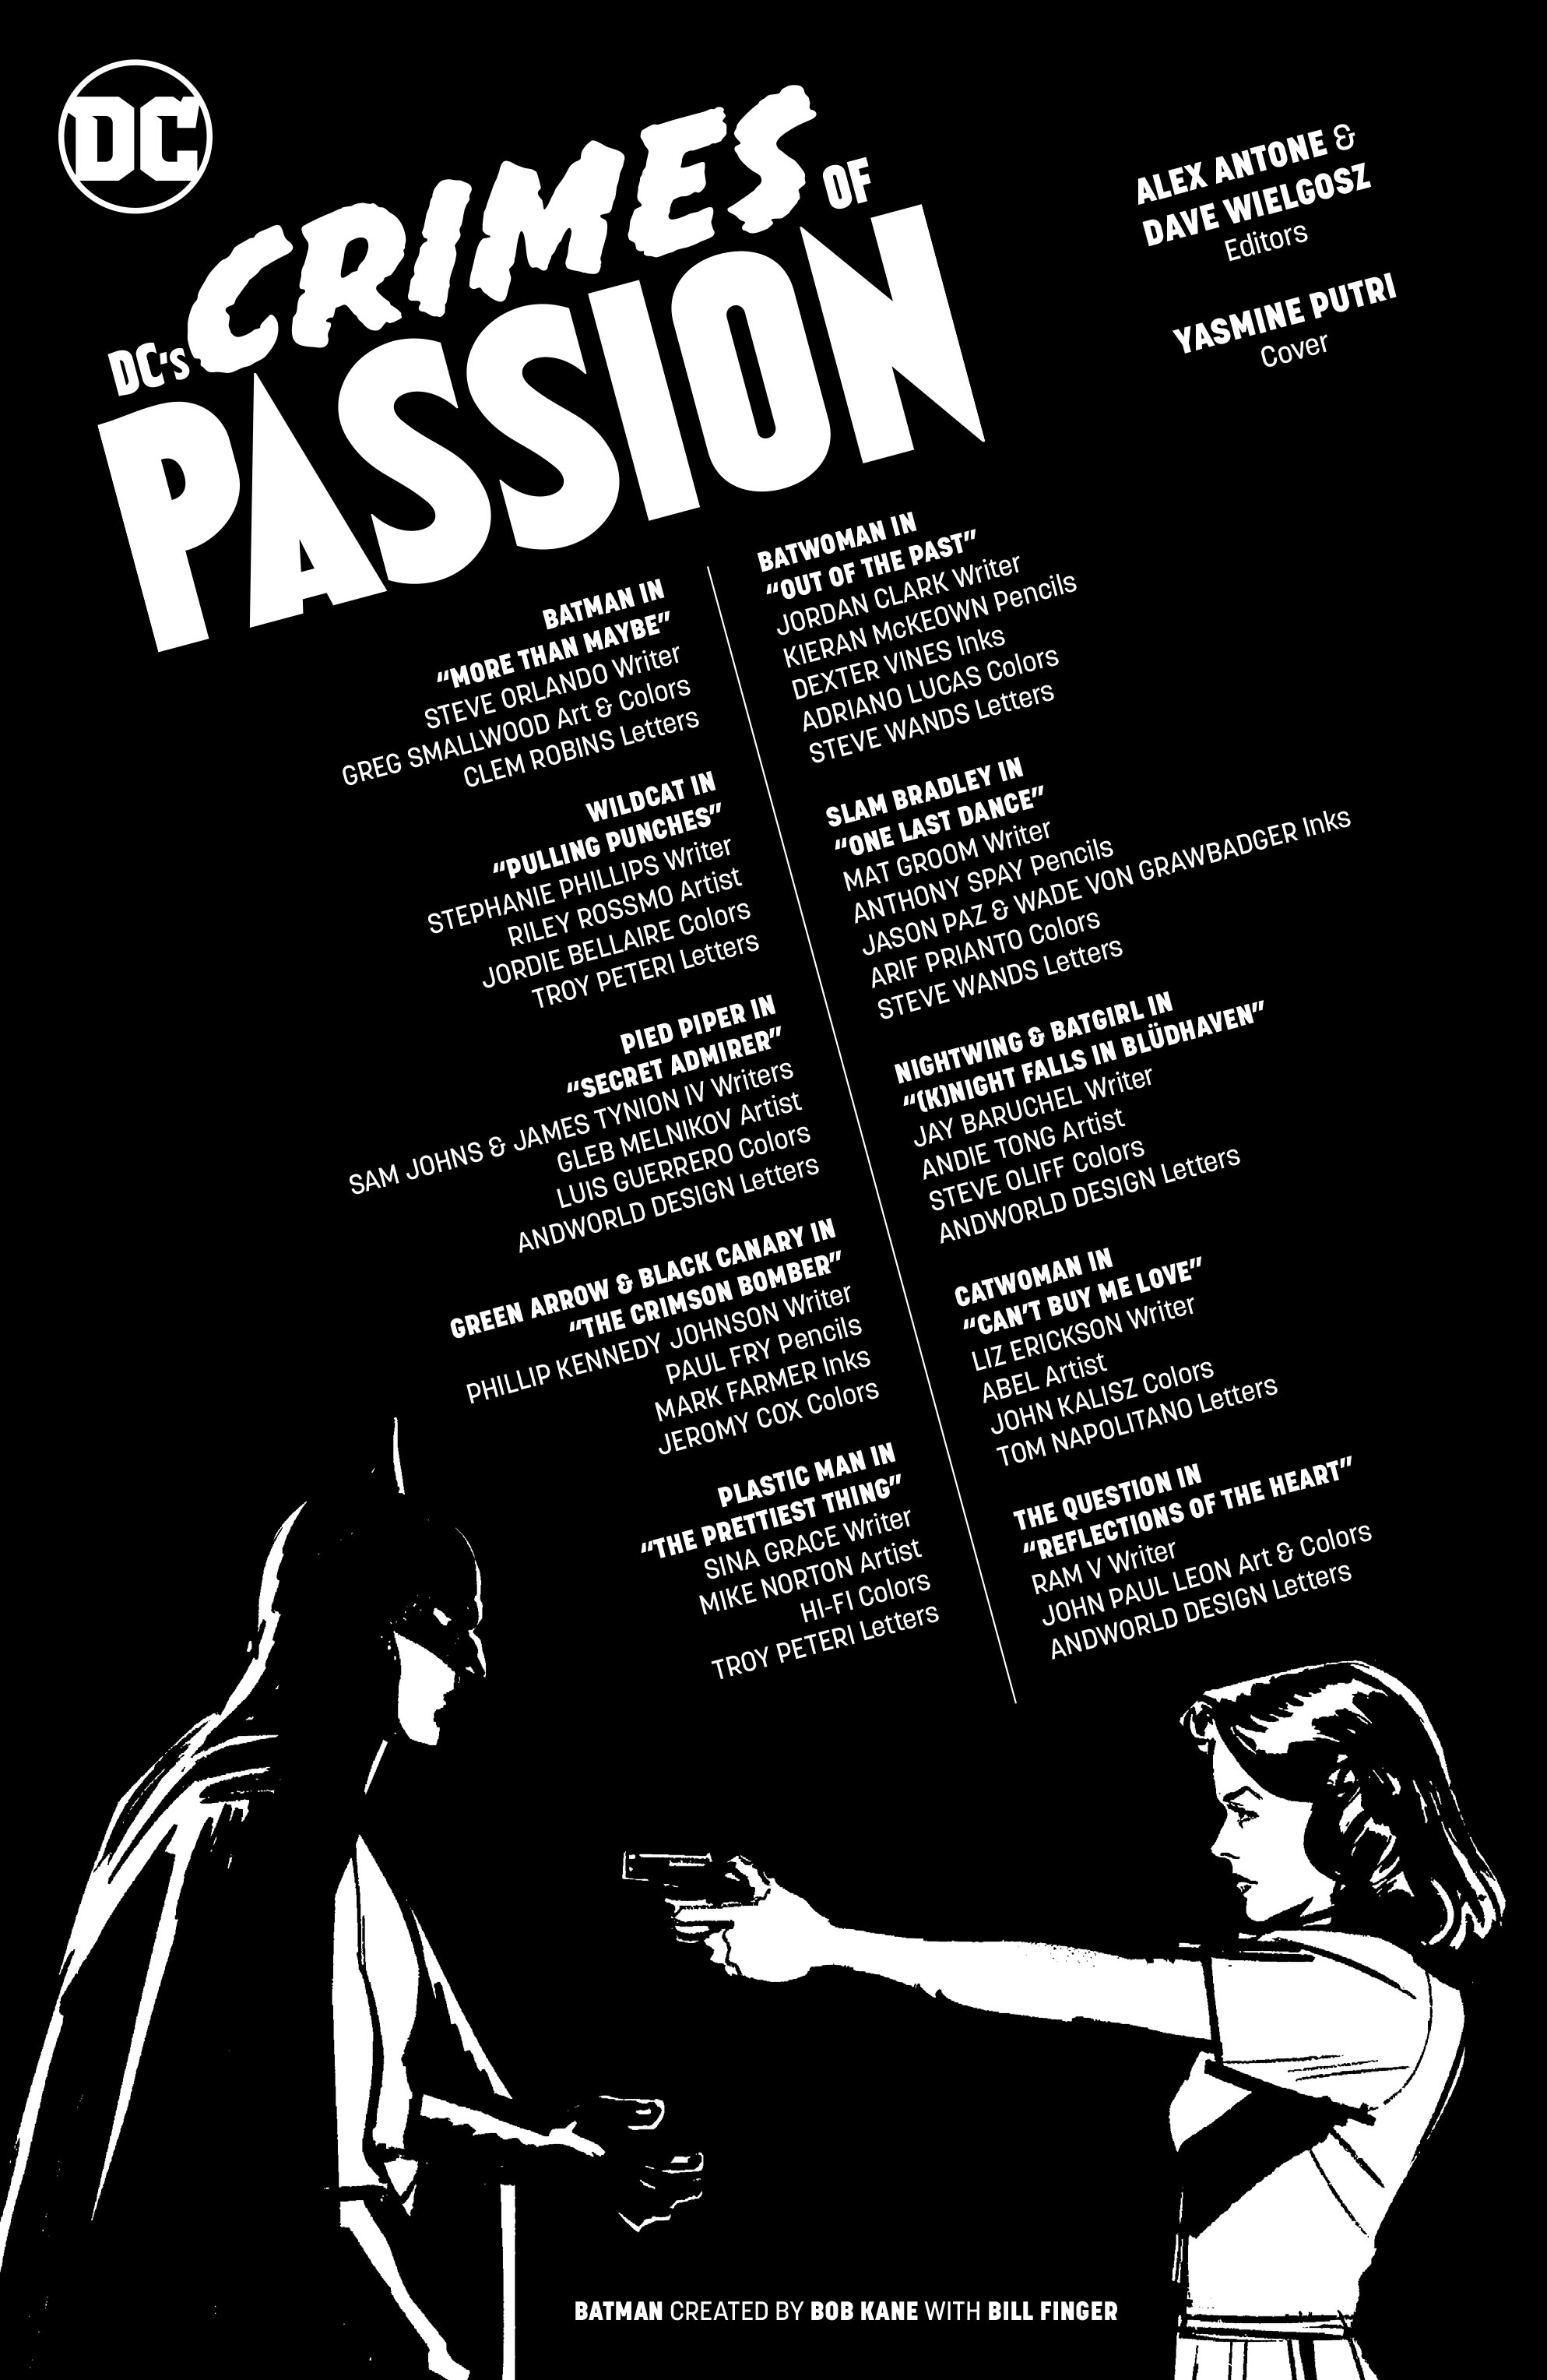 Read online DC's Crimes of Passion comic -  Issue # TPB - 2